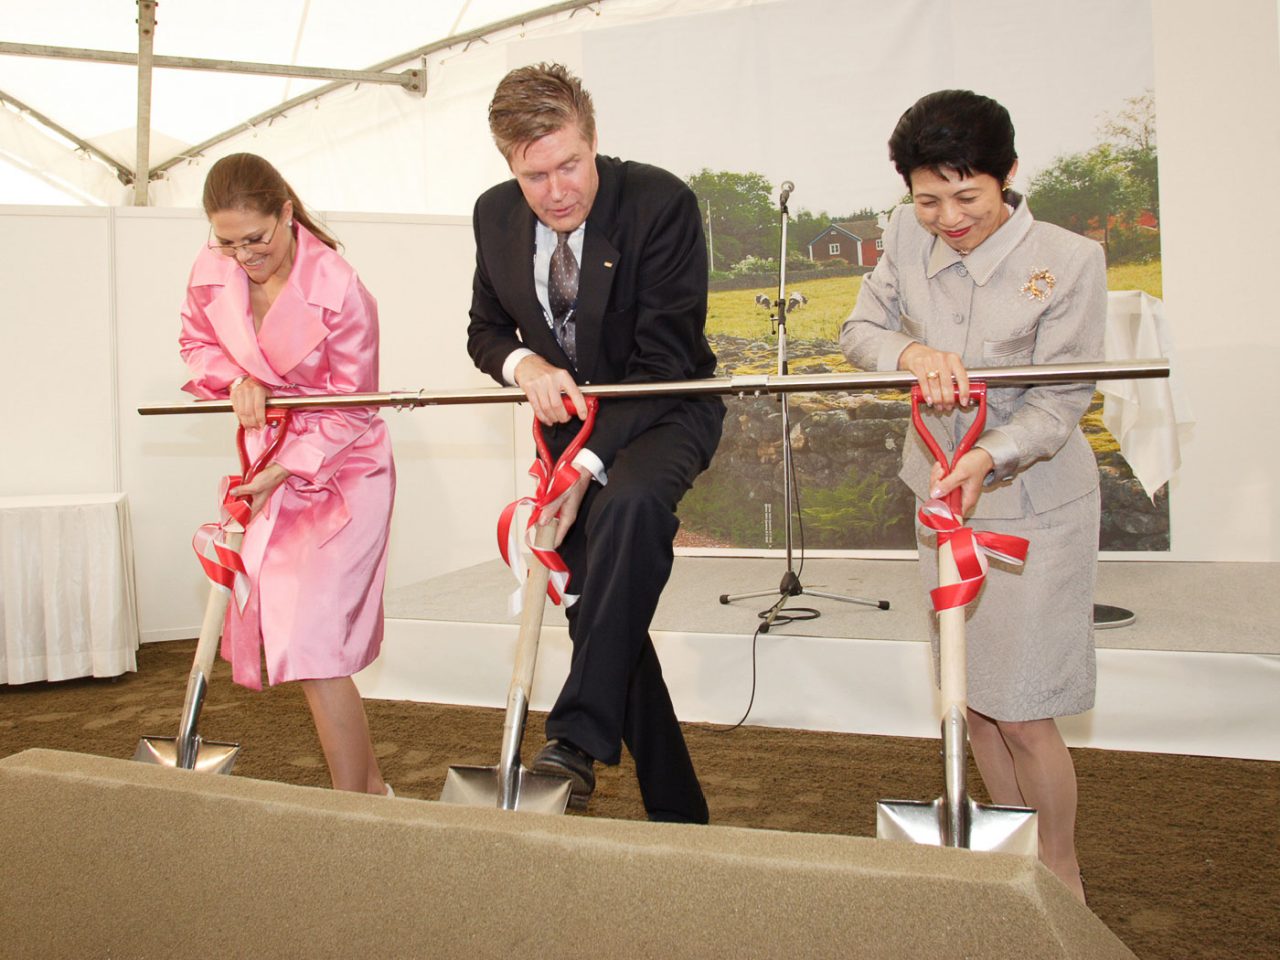 Three well-dressed people, woman in a pink suit, man in a dark suit, woman in a grey suit, each putting shovels into ground.